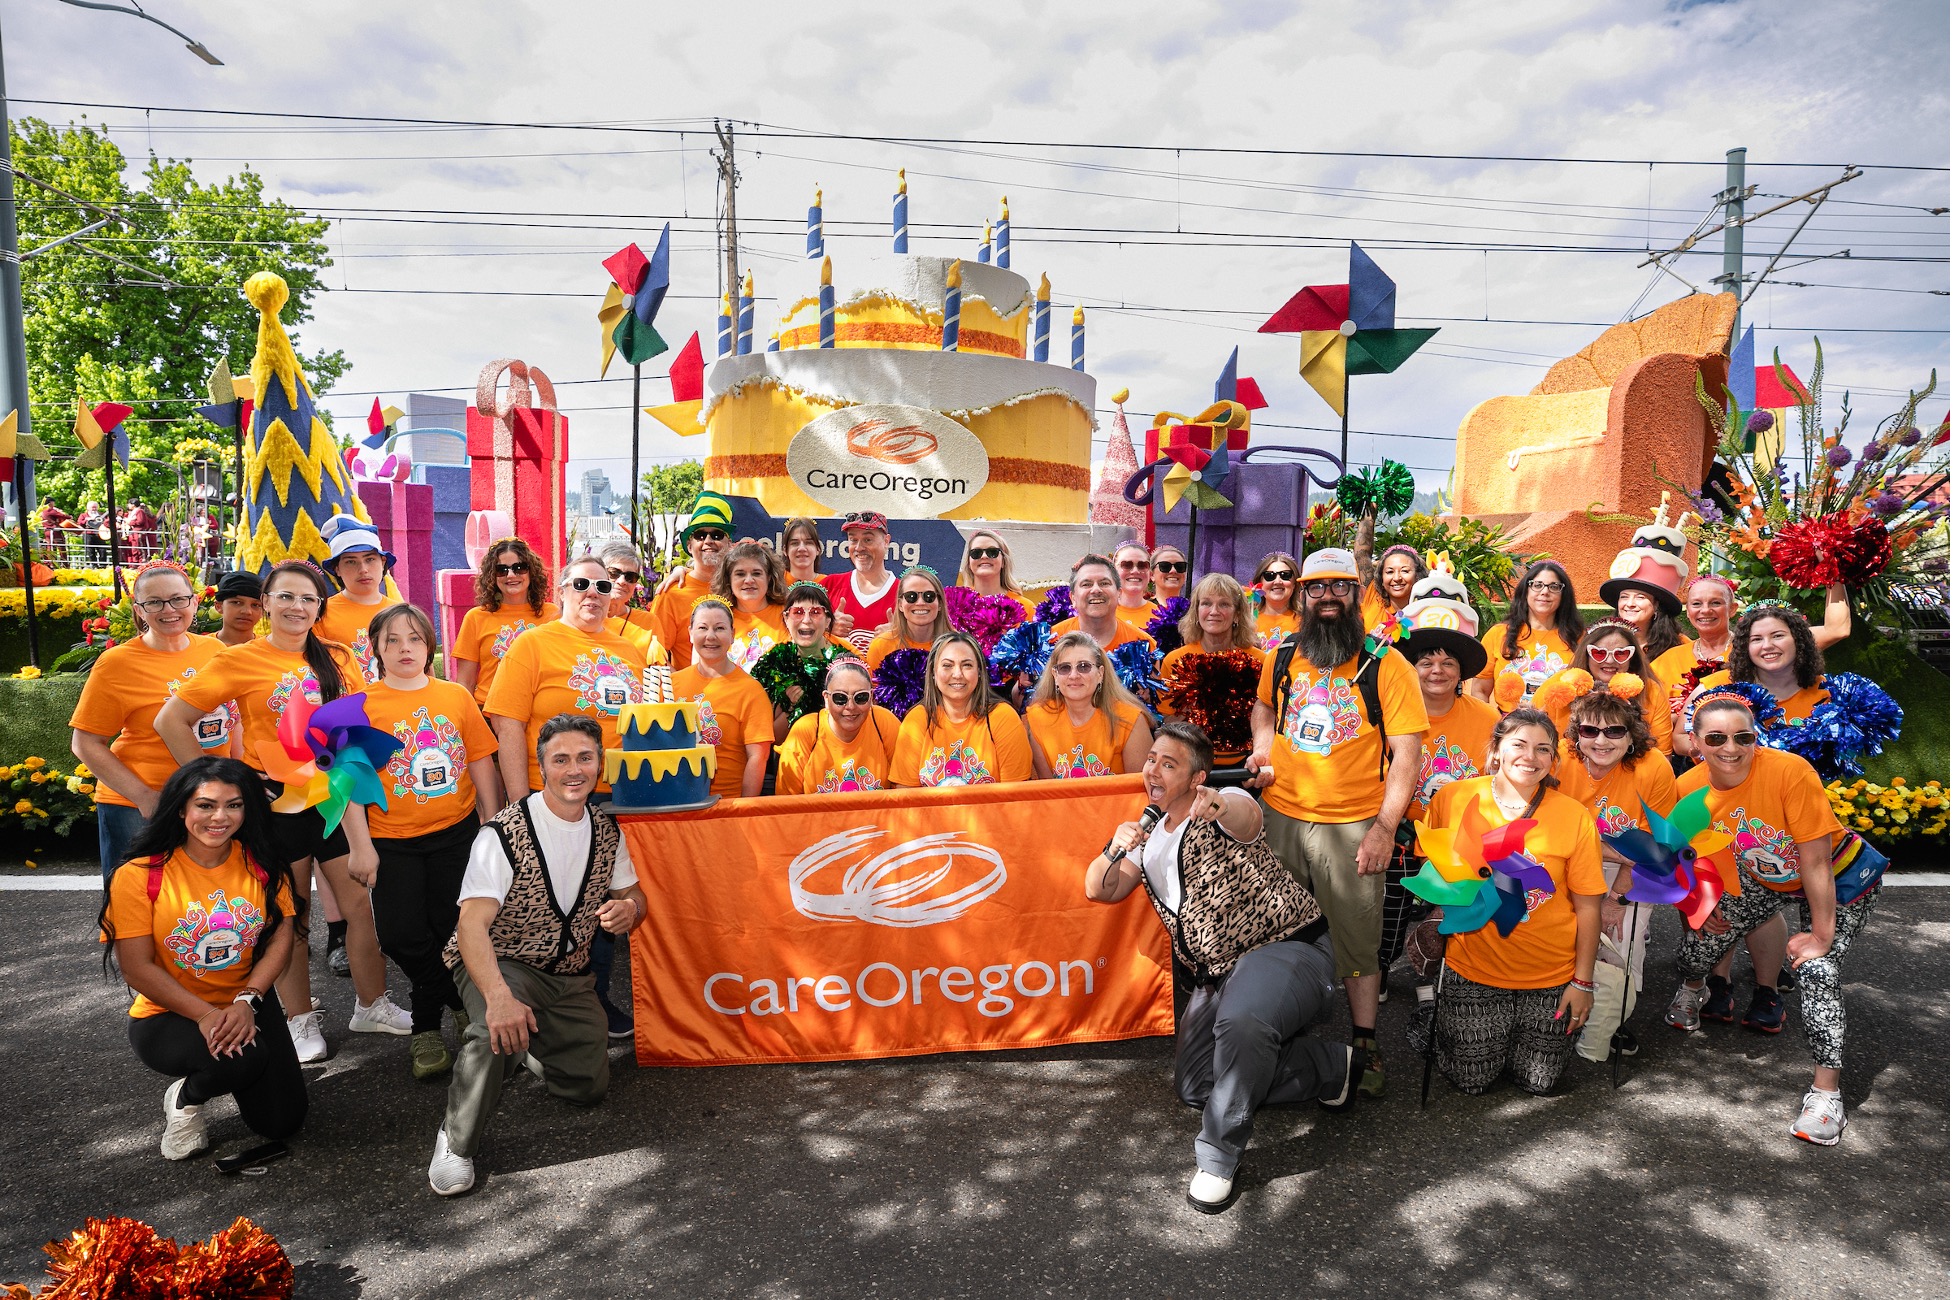 A group of people in orange CareOregon shirts gathered in front of a parade float with a large birthday cake and sign that reads CarerOregon